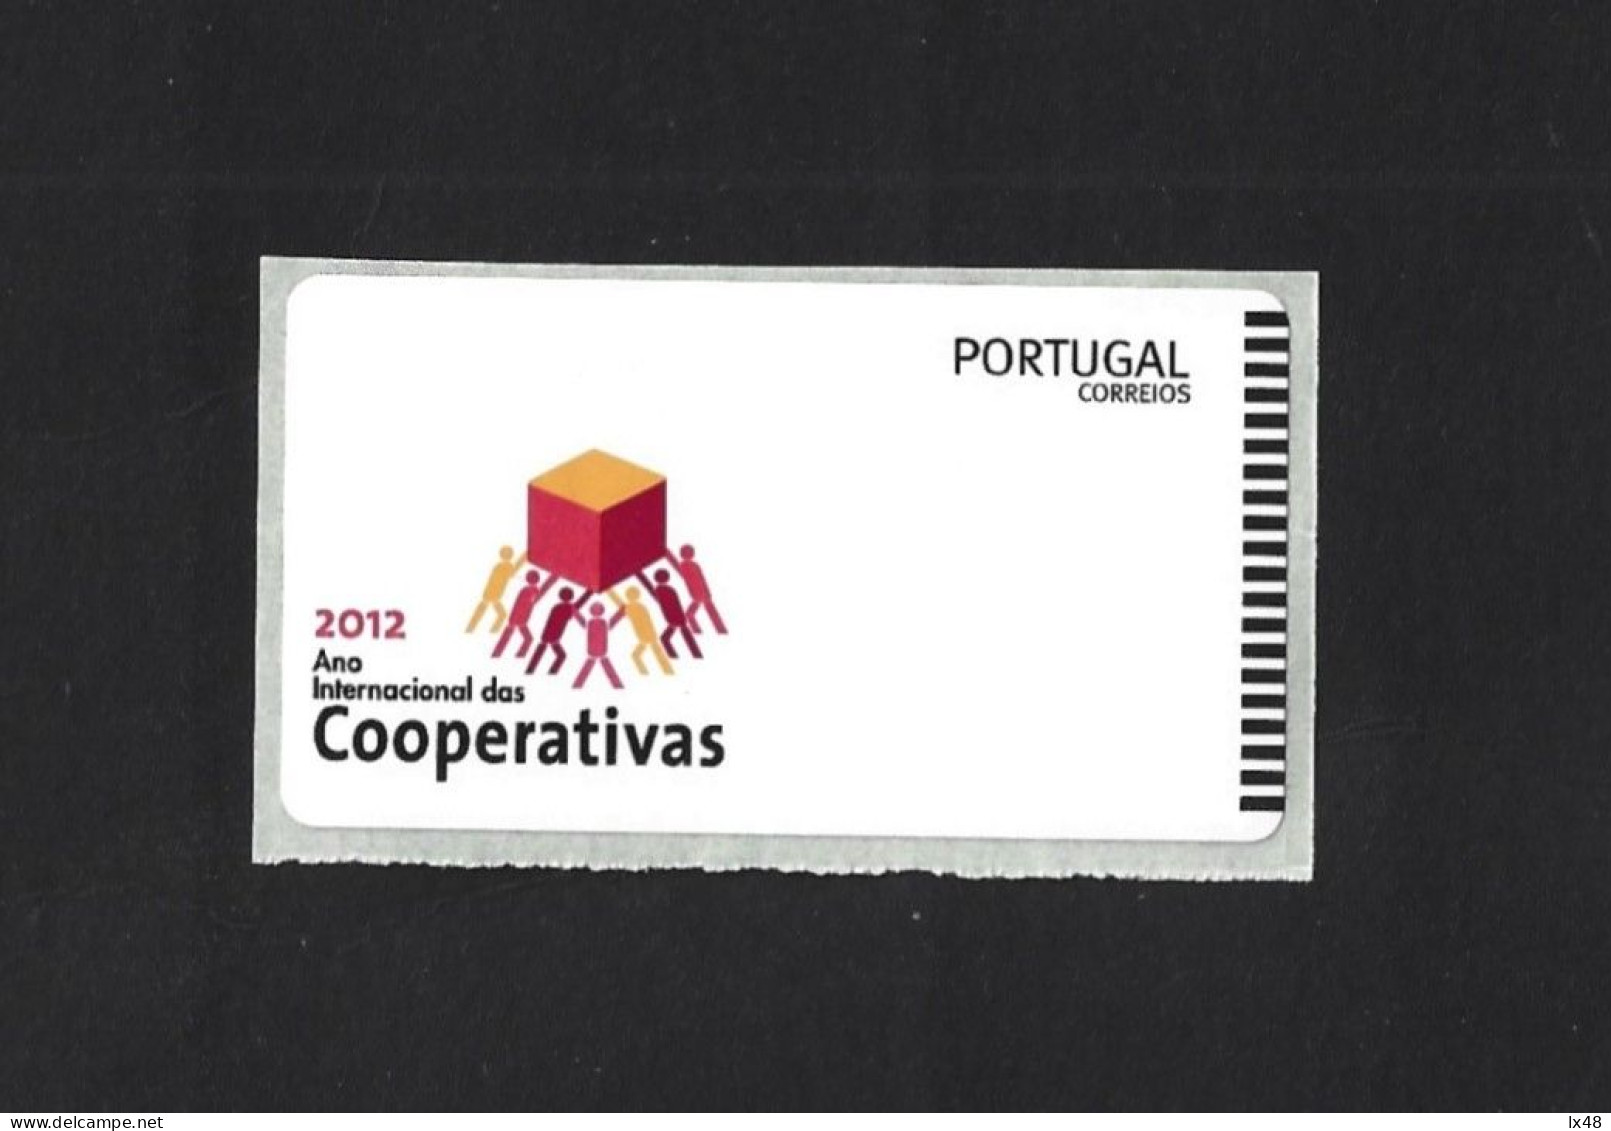 Cooperatives. Franchise Print Label With No Franchise Value Dedicated To International Year Of Cooperatives. Coöperaties - European Community